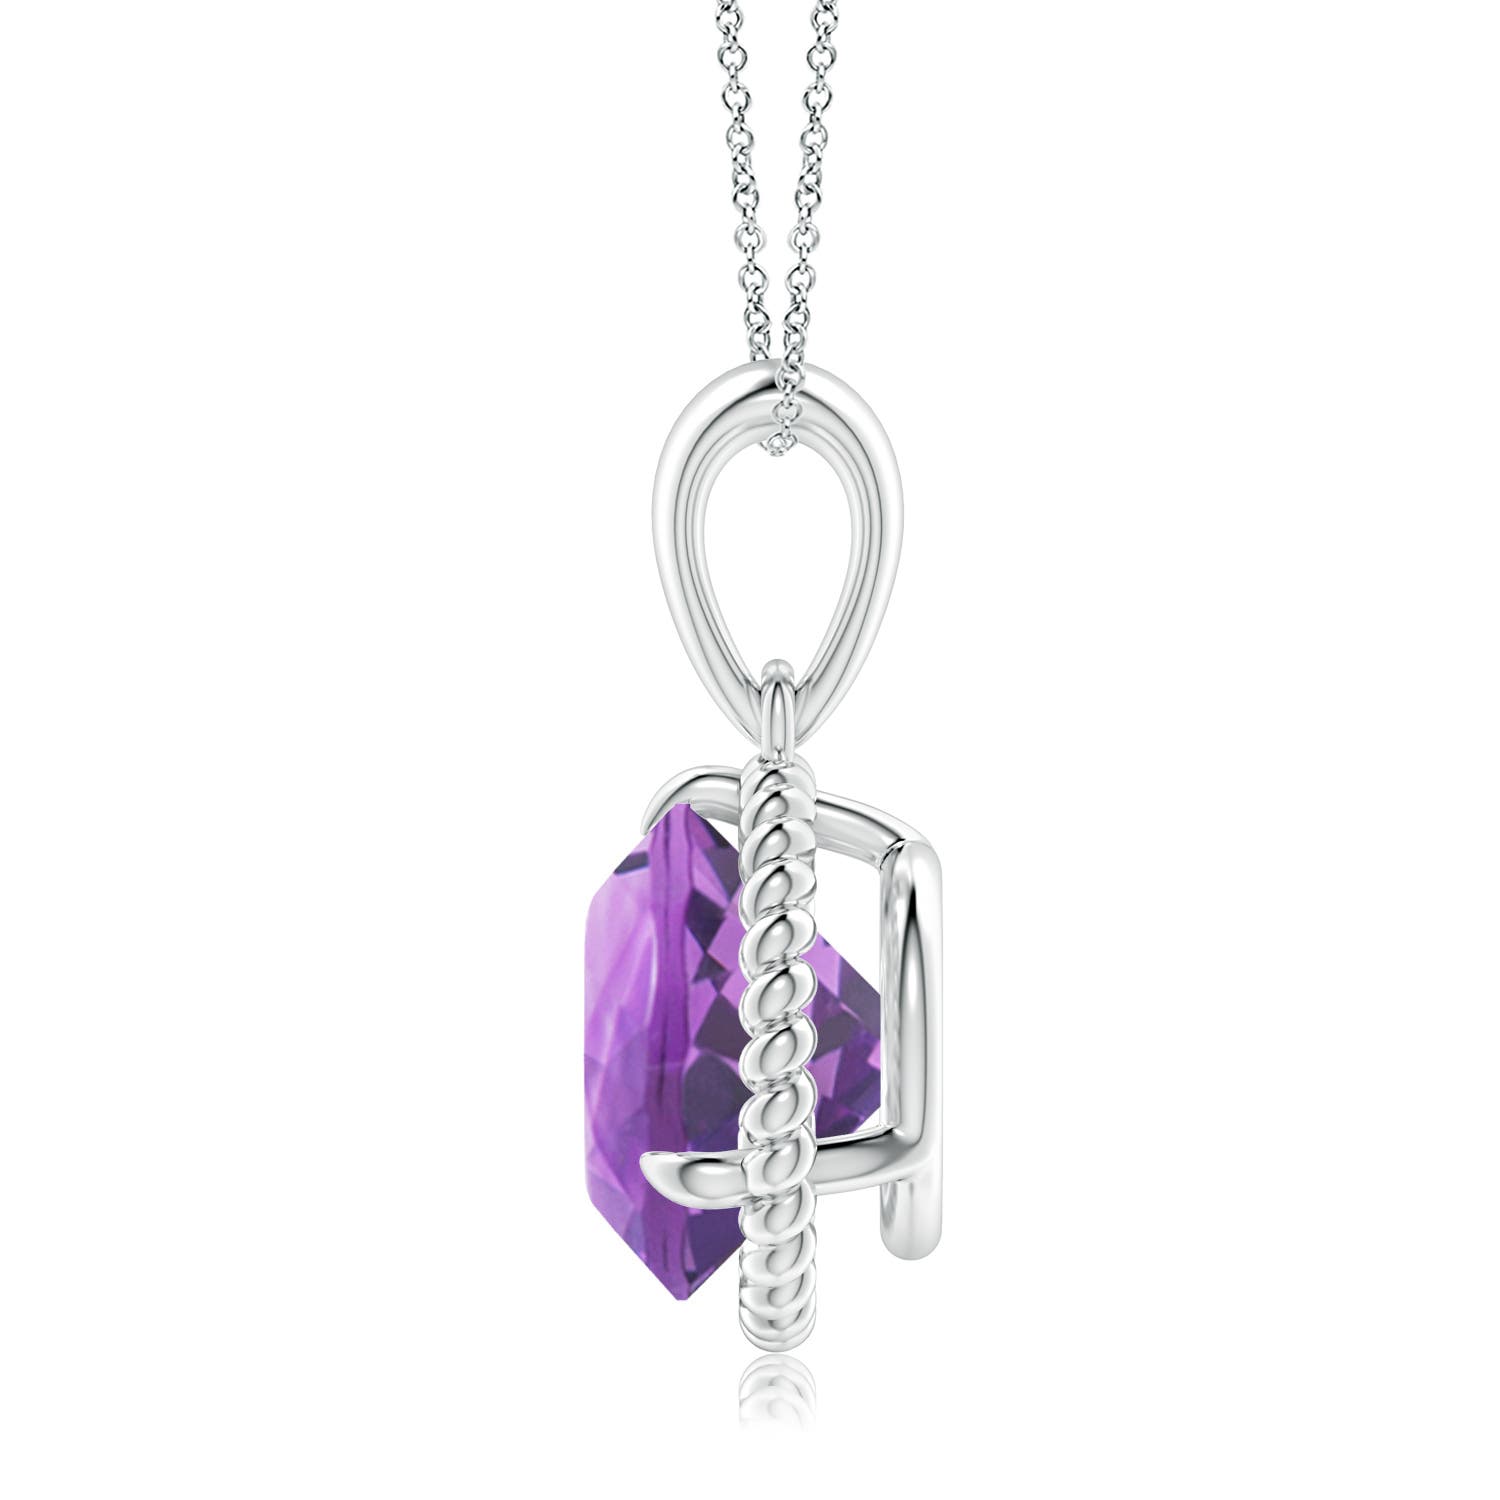 A - Amethyst / 3.2 CT / 14 KT White Gold